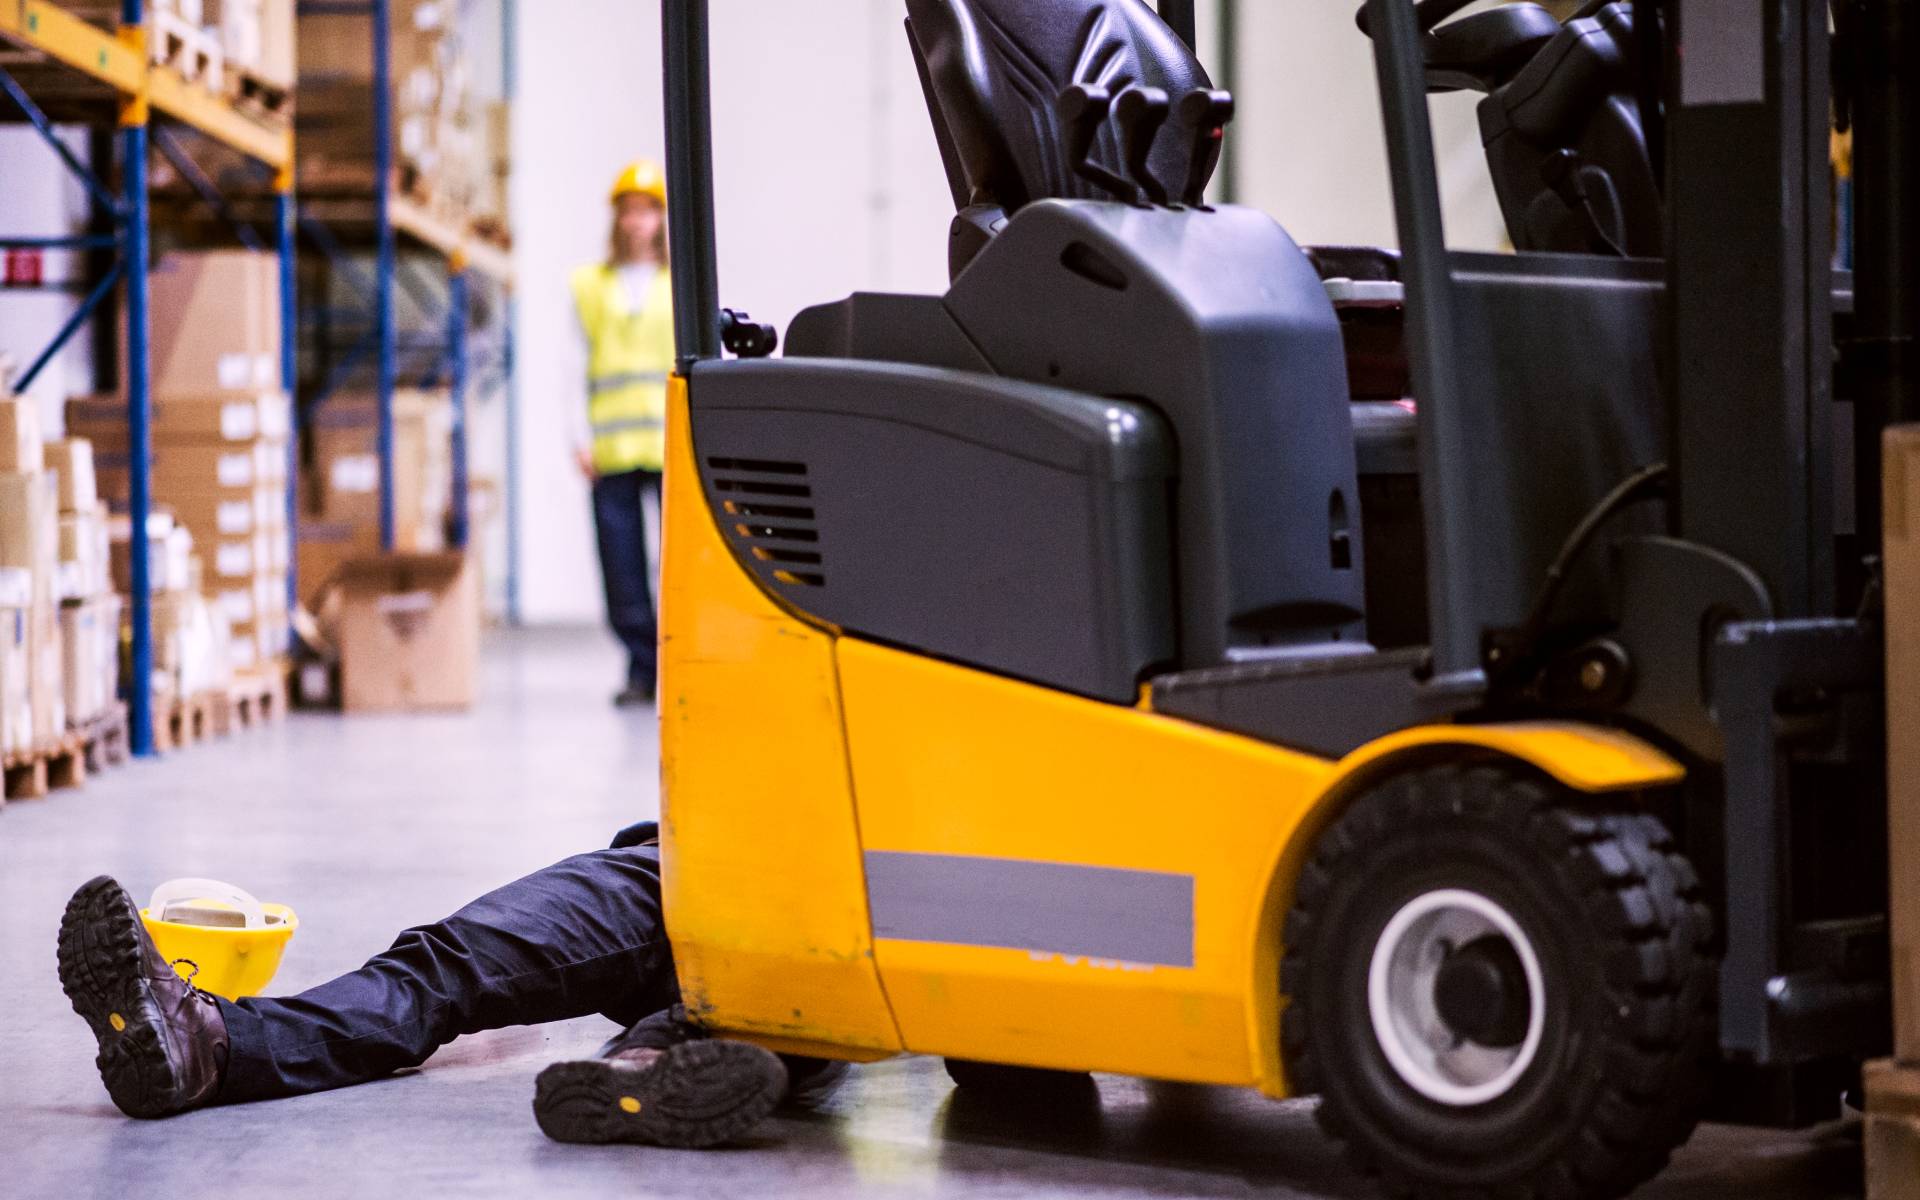 Man unconscious on floor after being hit with forklift at work